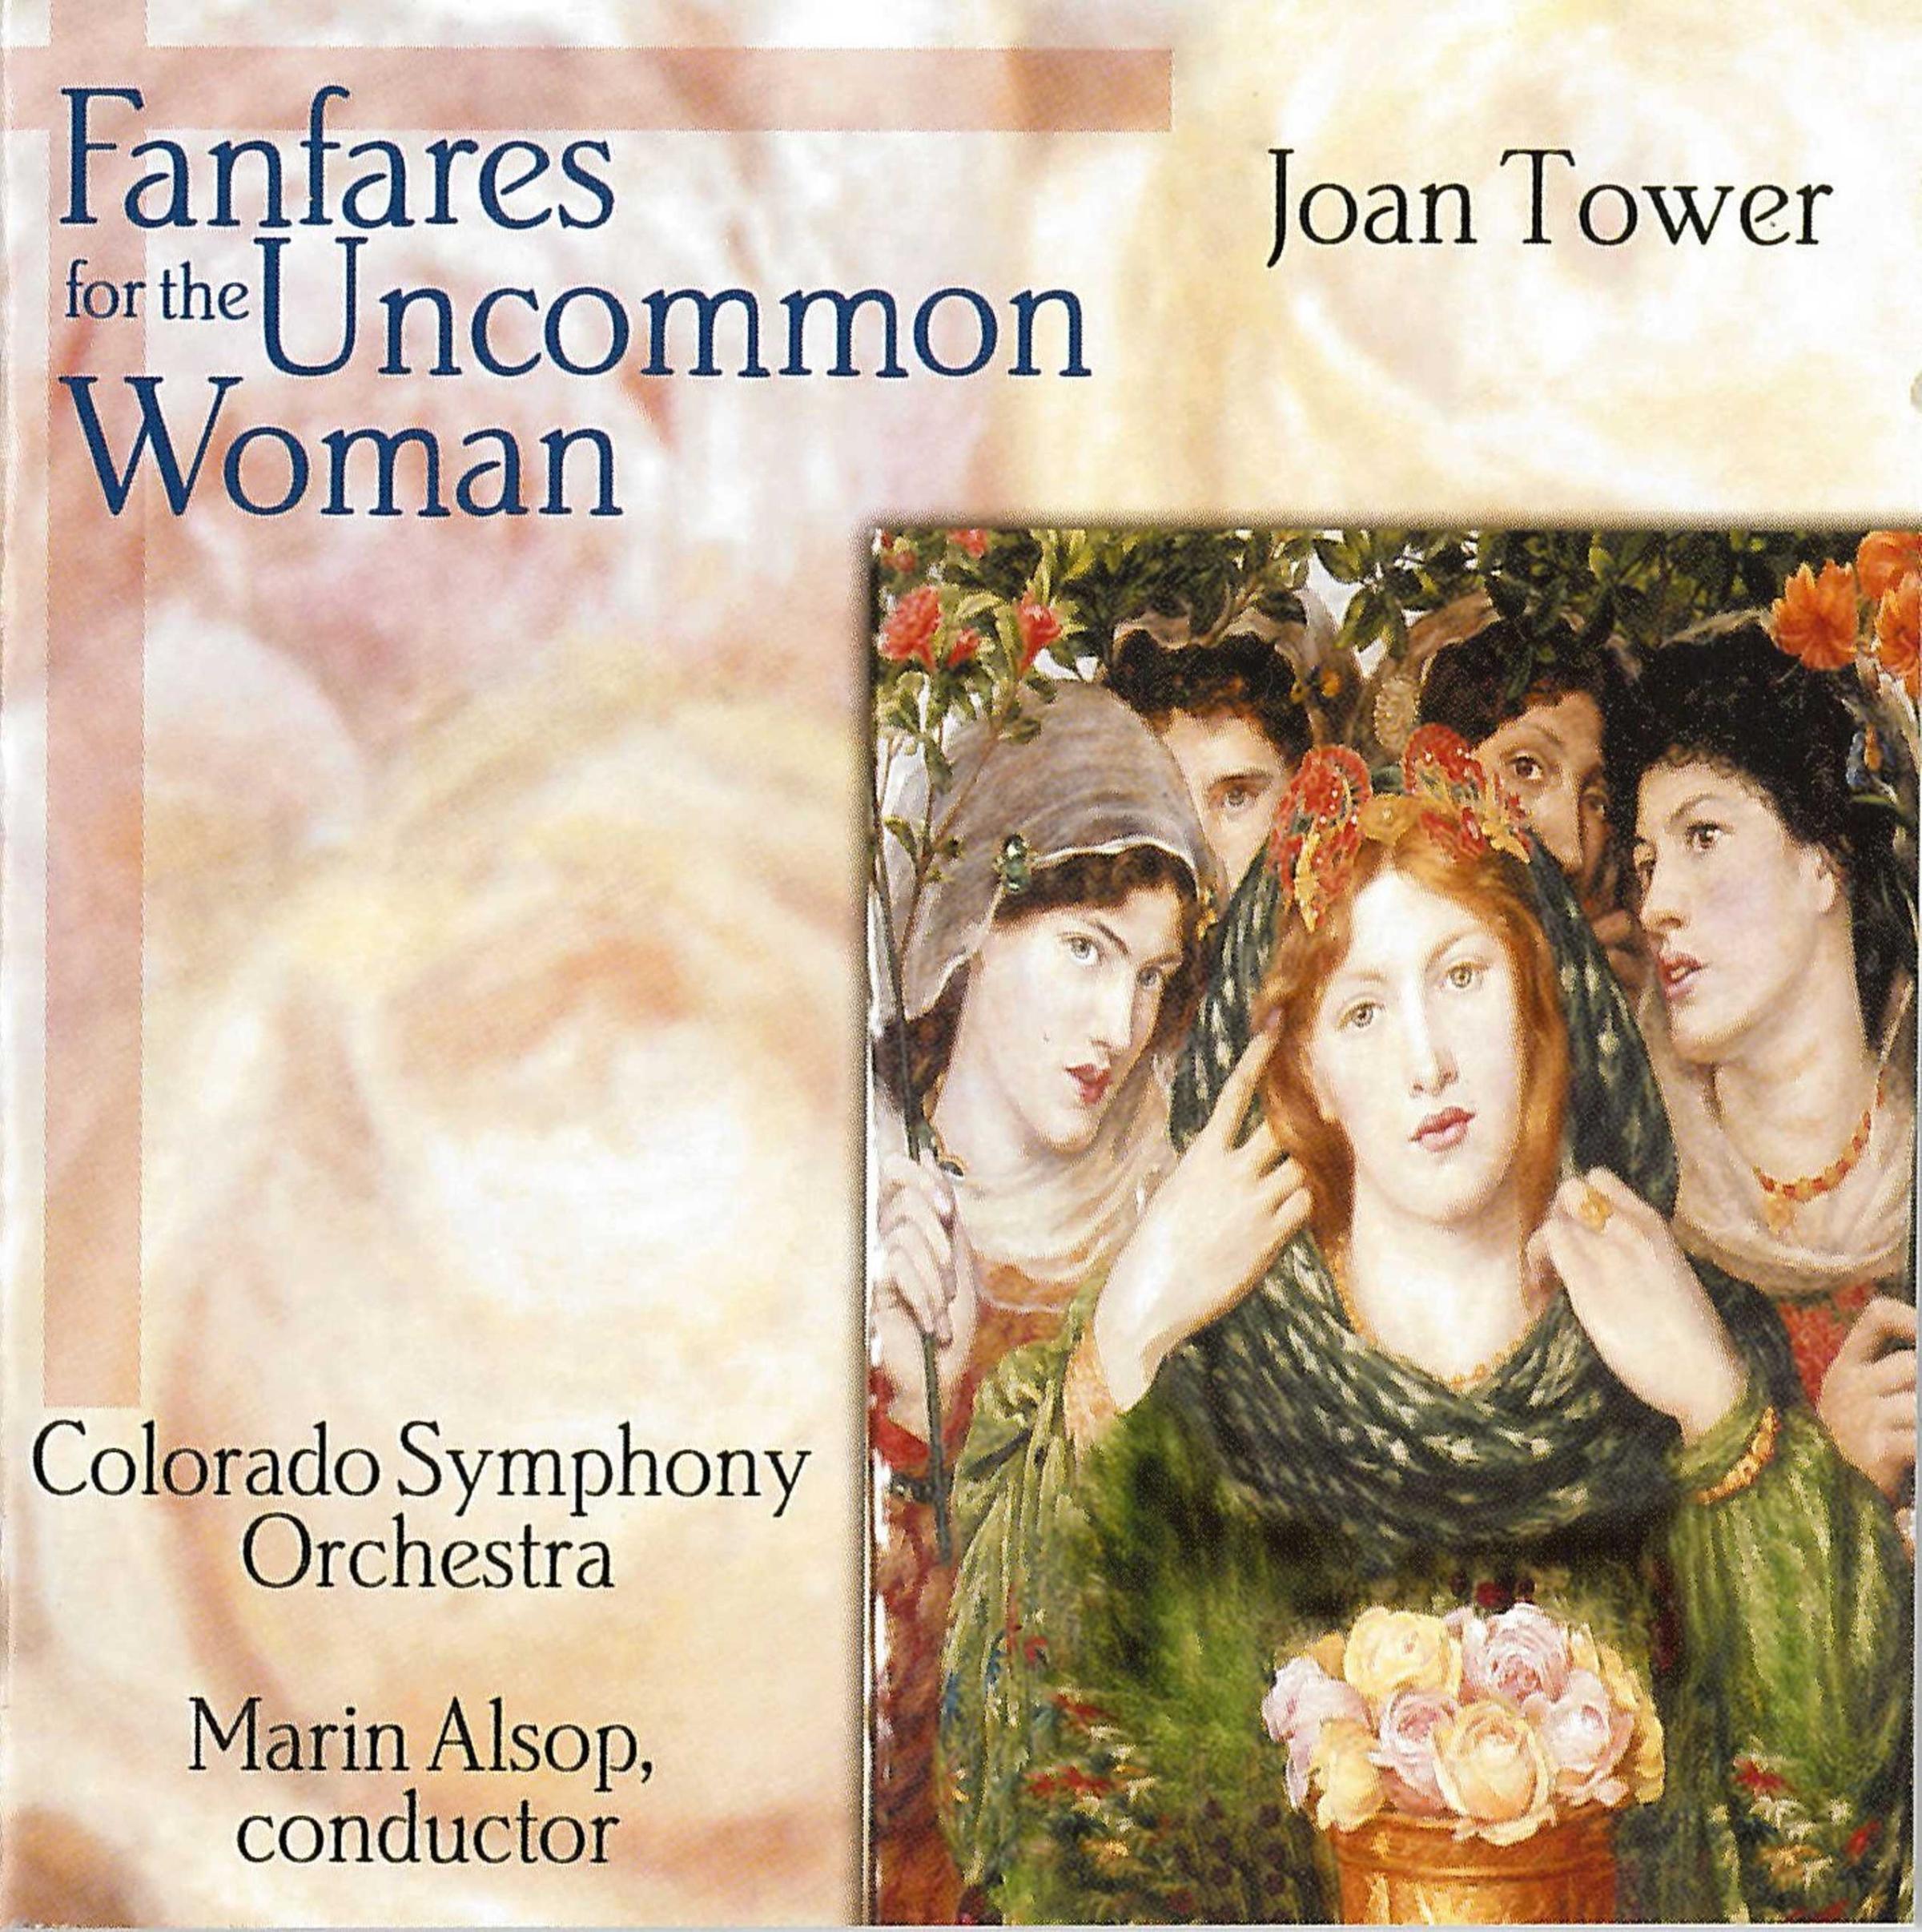 “Fanfares for the Uncommon Woman”—Joan Tower (CD cover). Courtesy KOCH International.